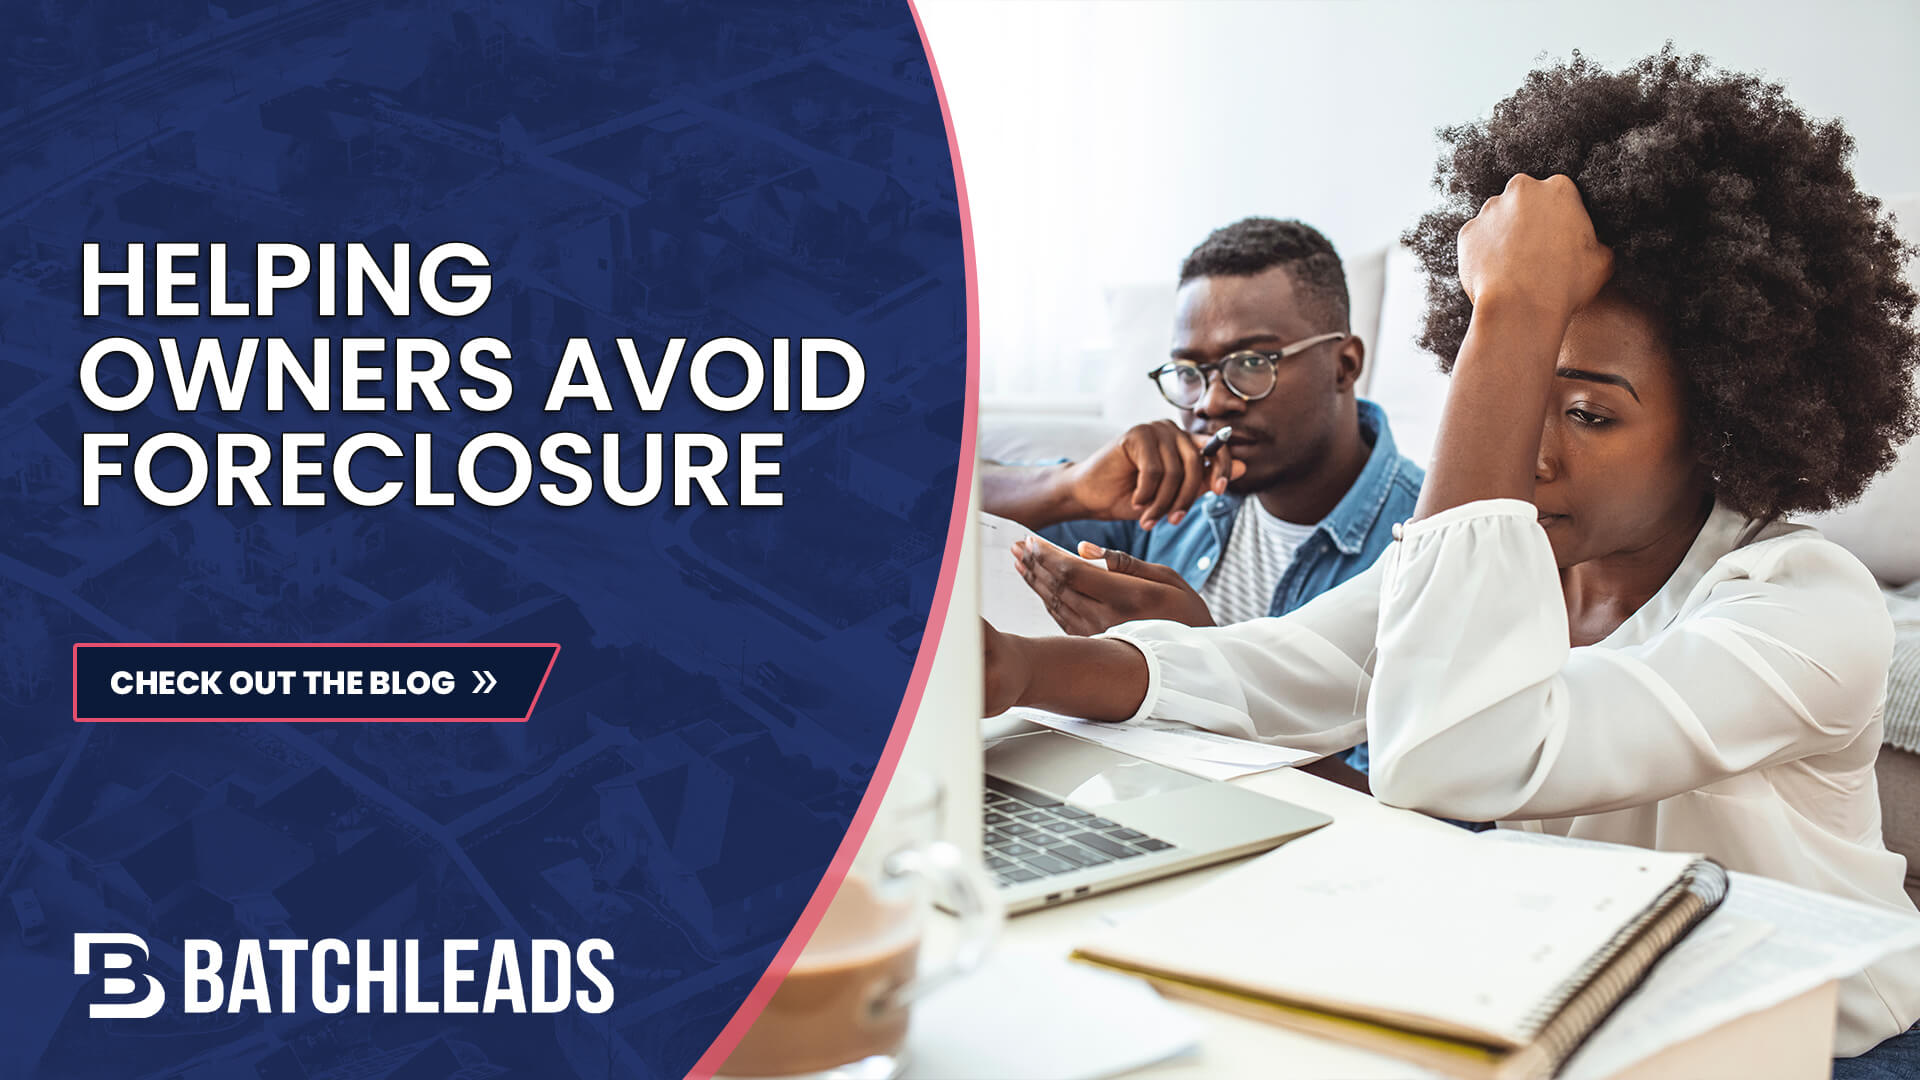 HELPING OWNERS AVOID FORECLOSURE